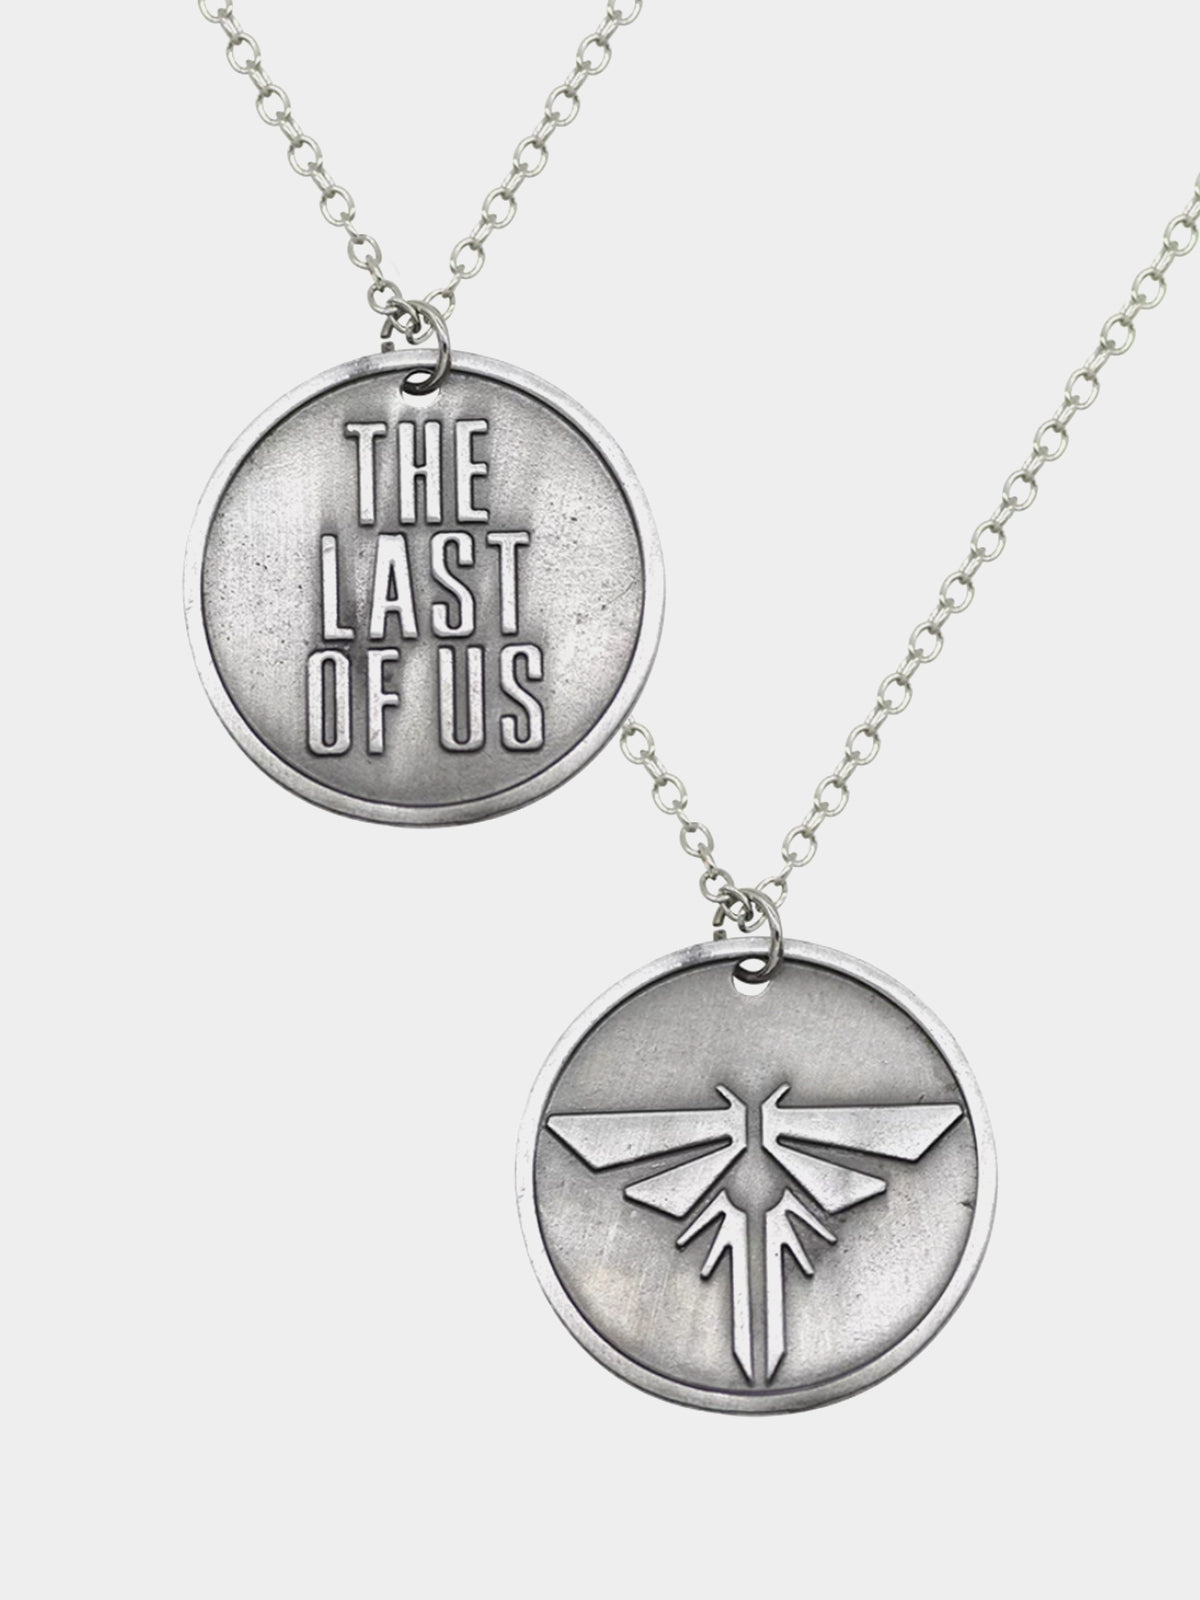 The Last of Us Necklace